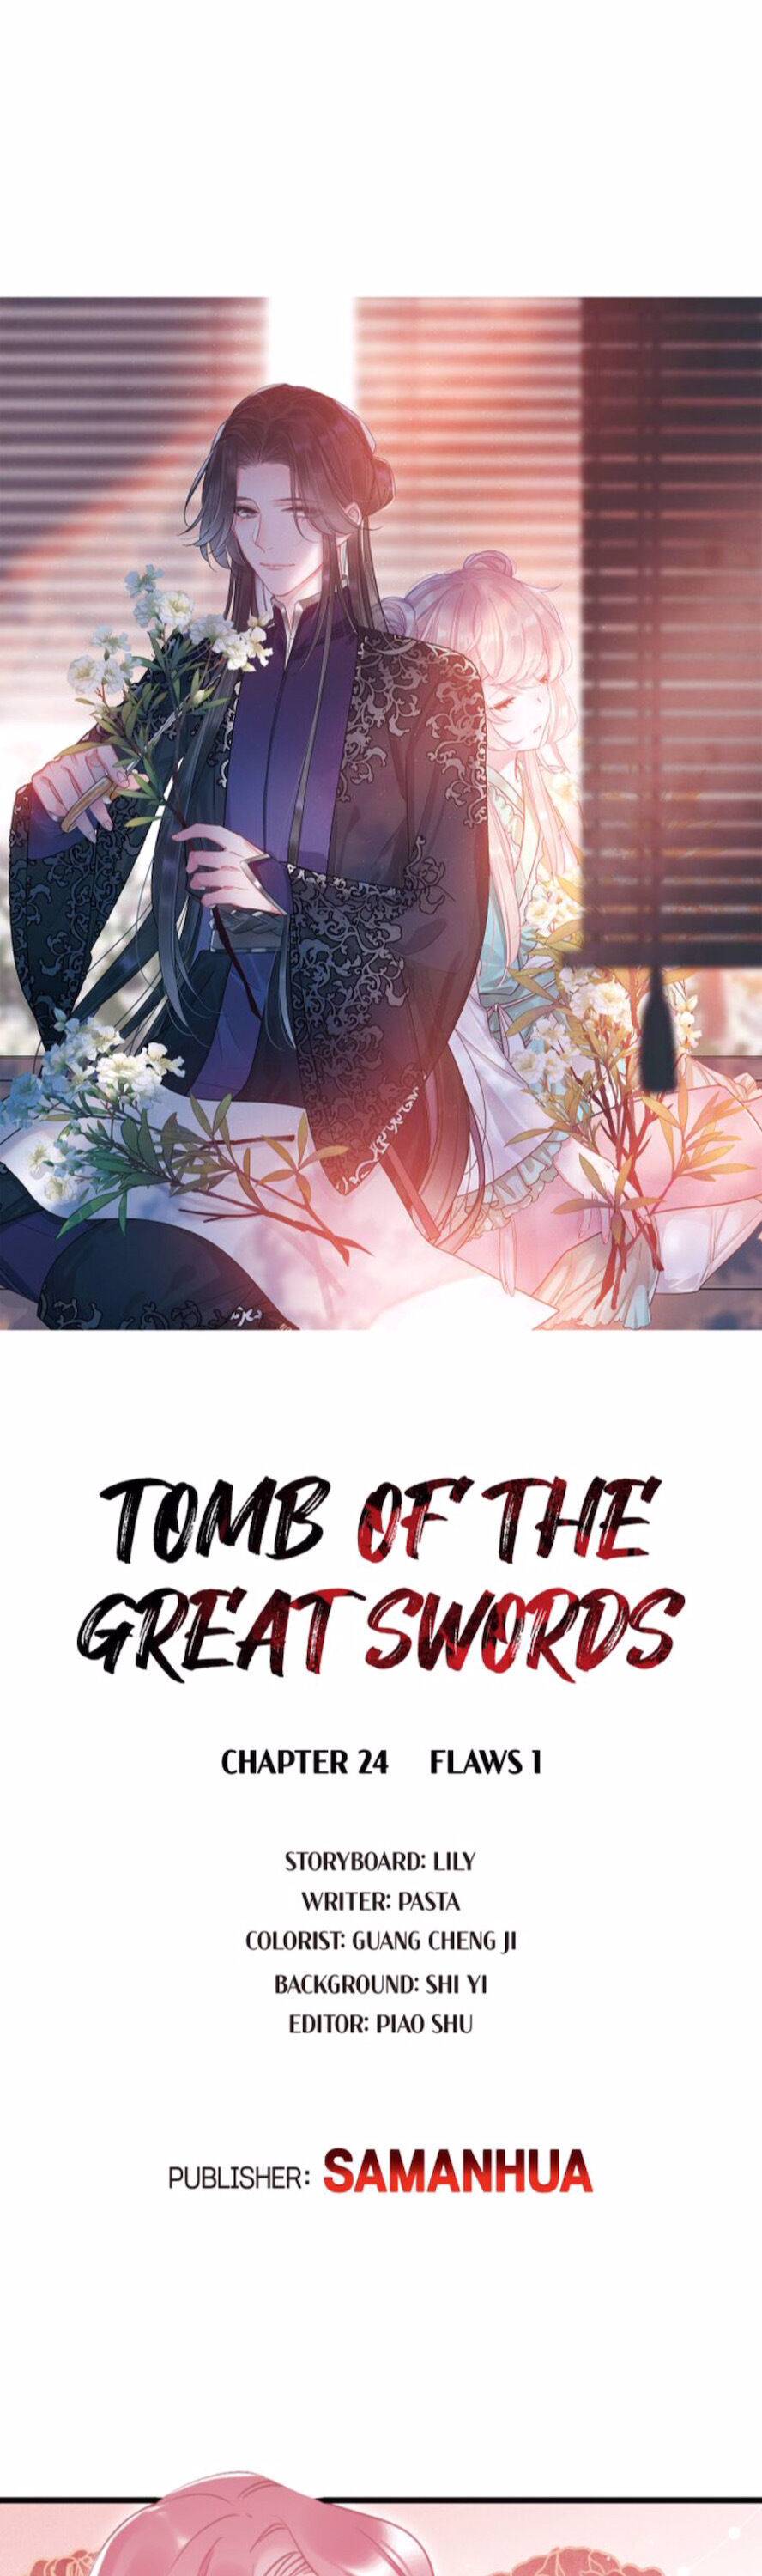 Tomb of the Great Swords Chapter 24